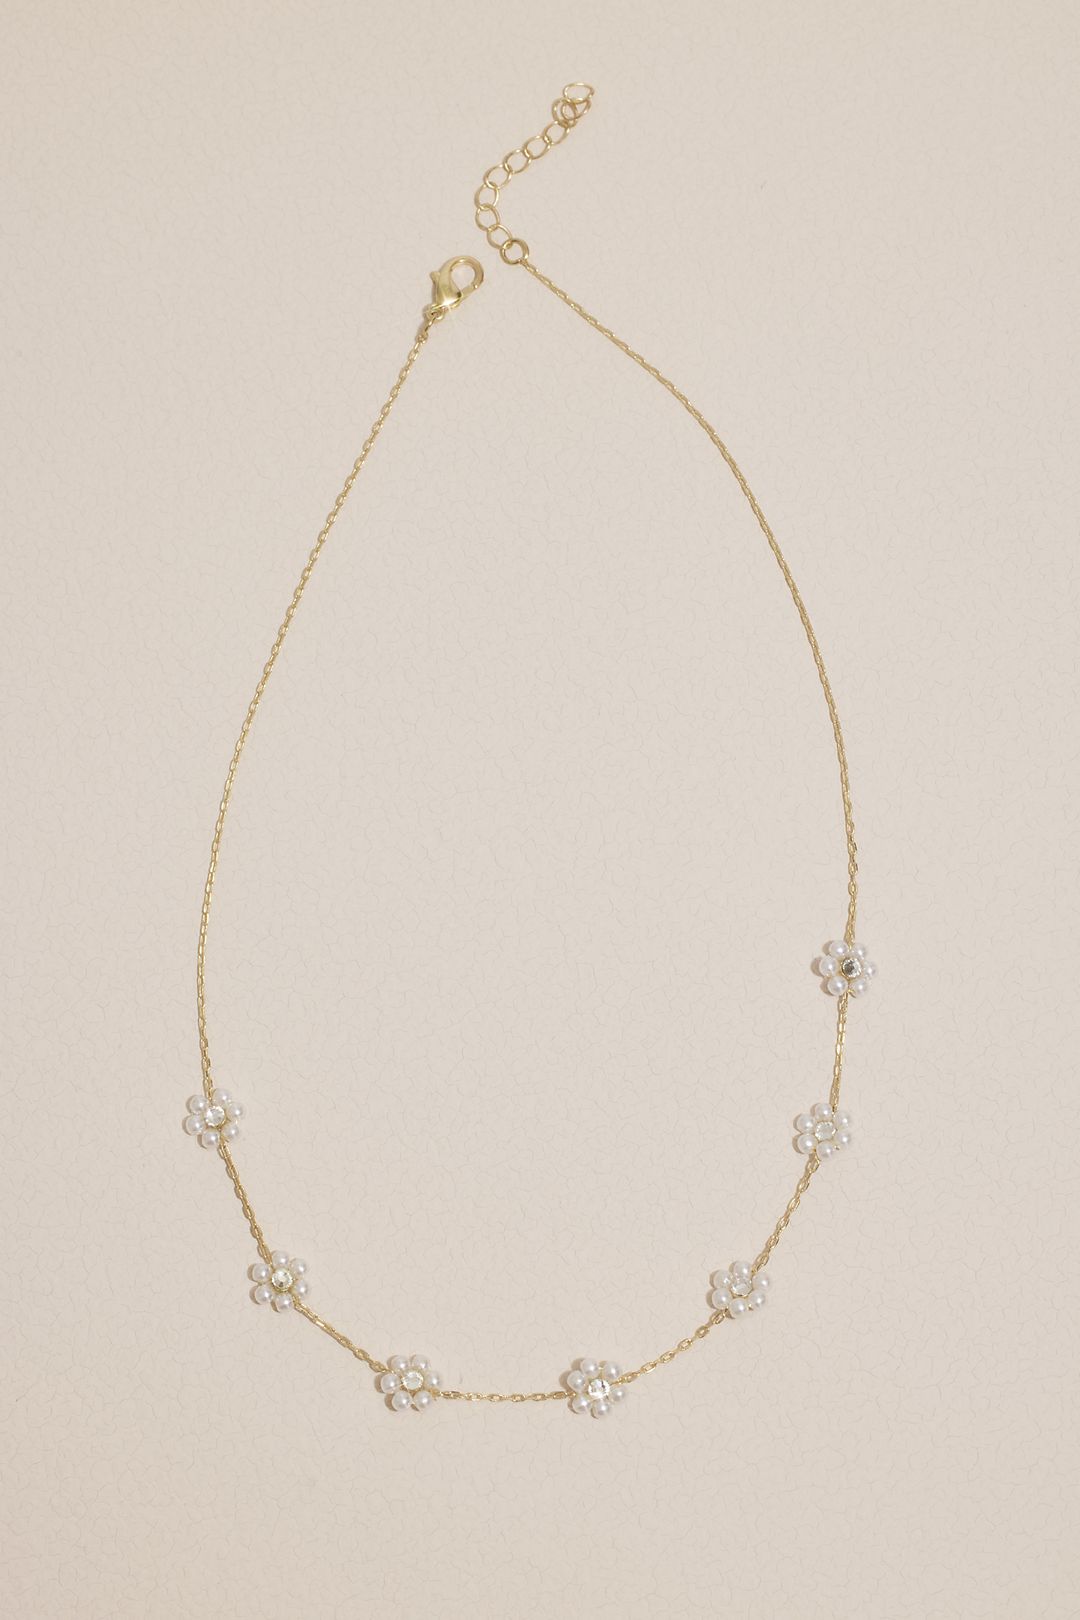 Tiny Pearl Flower Layered Necklace Image 3